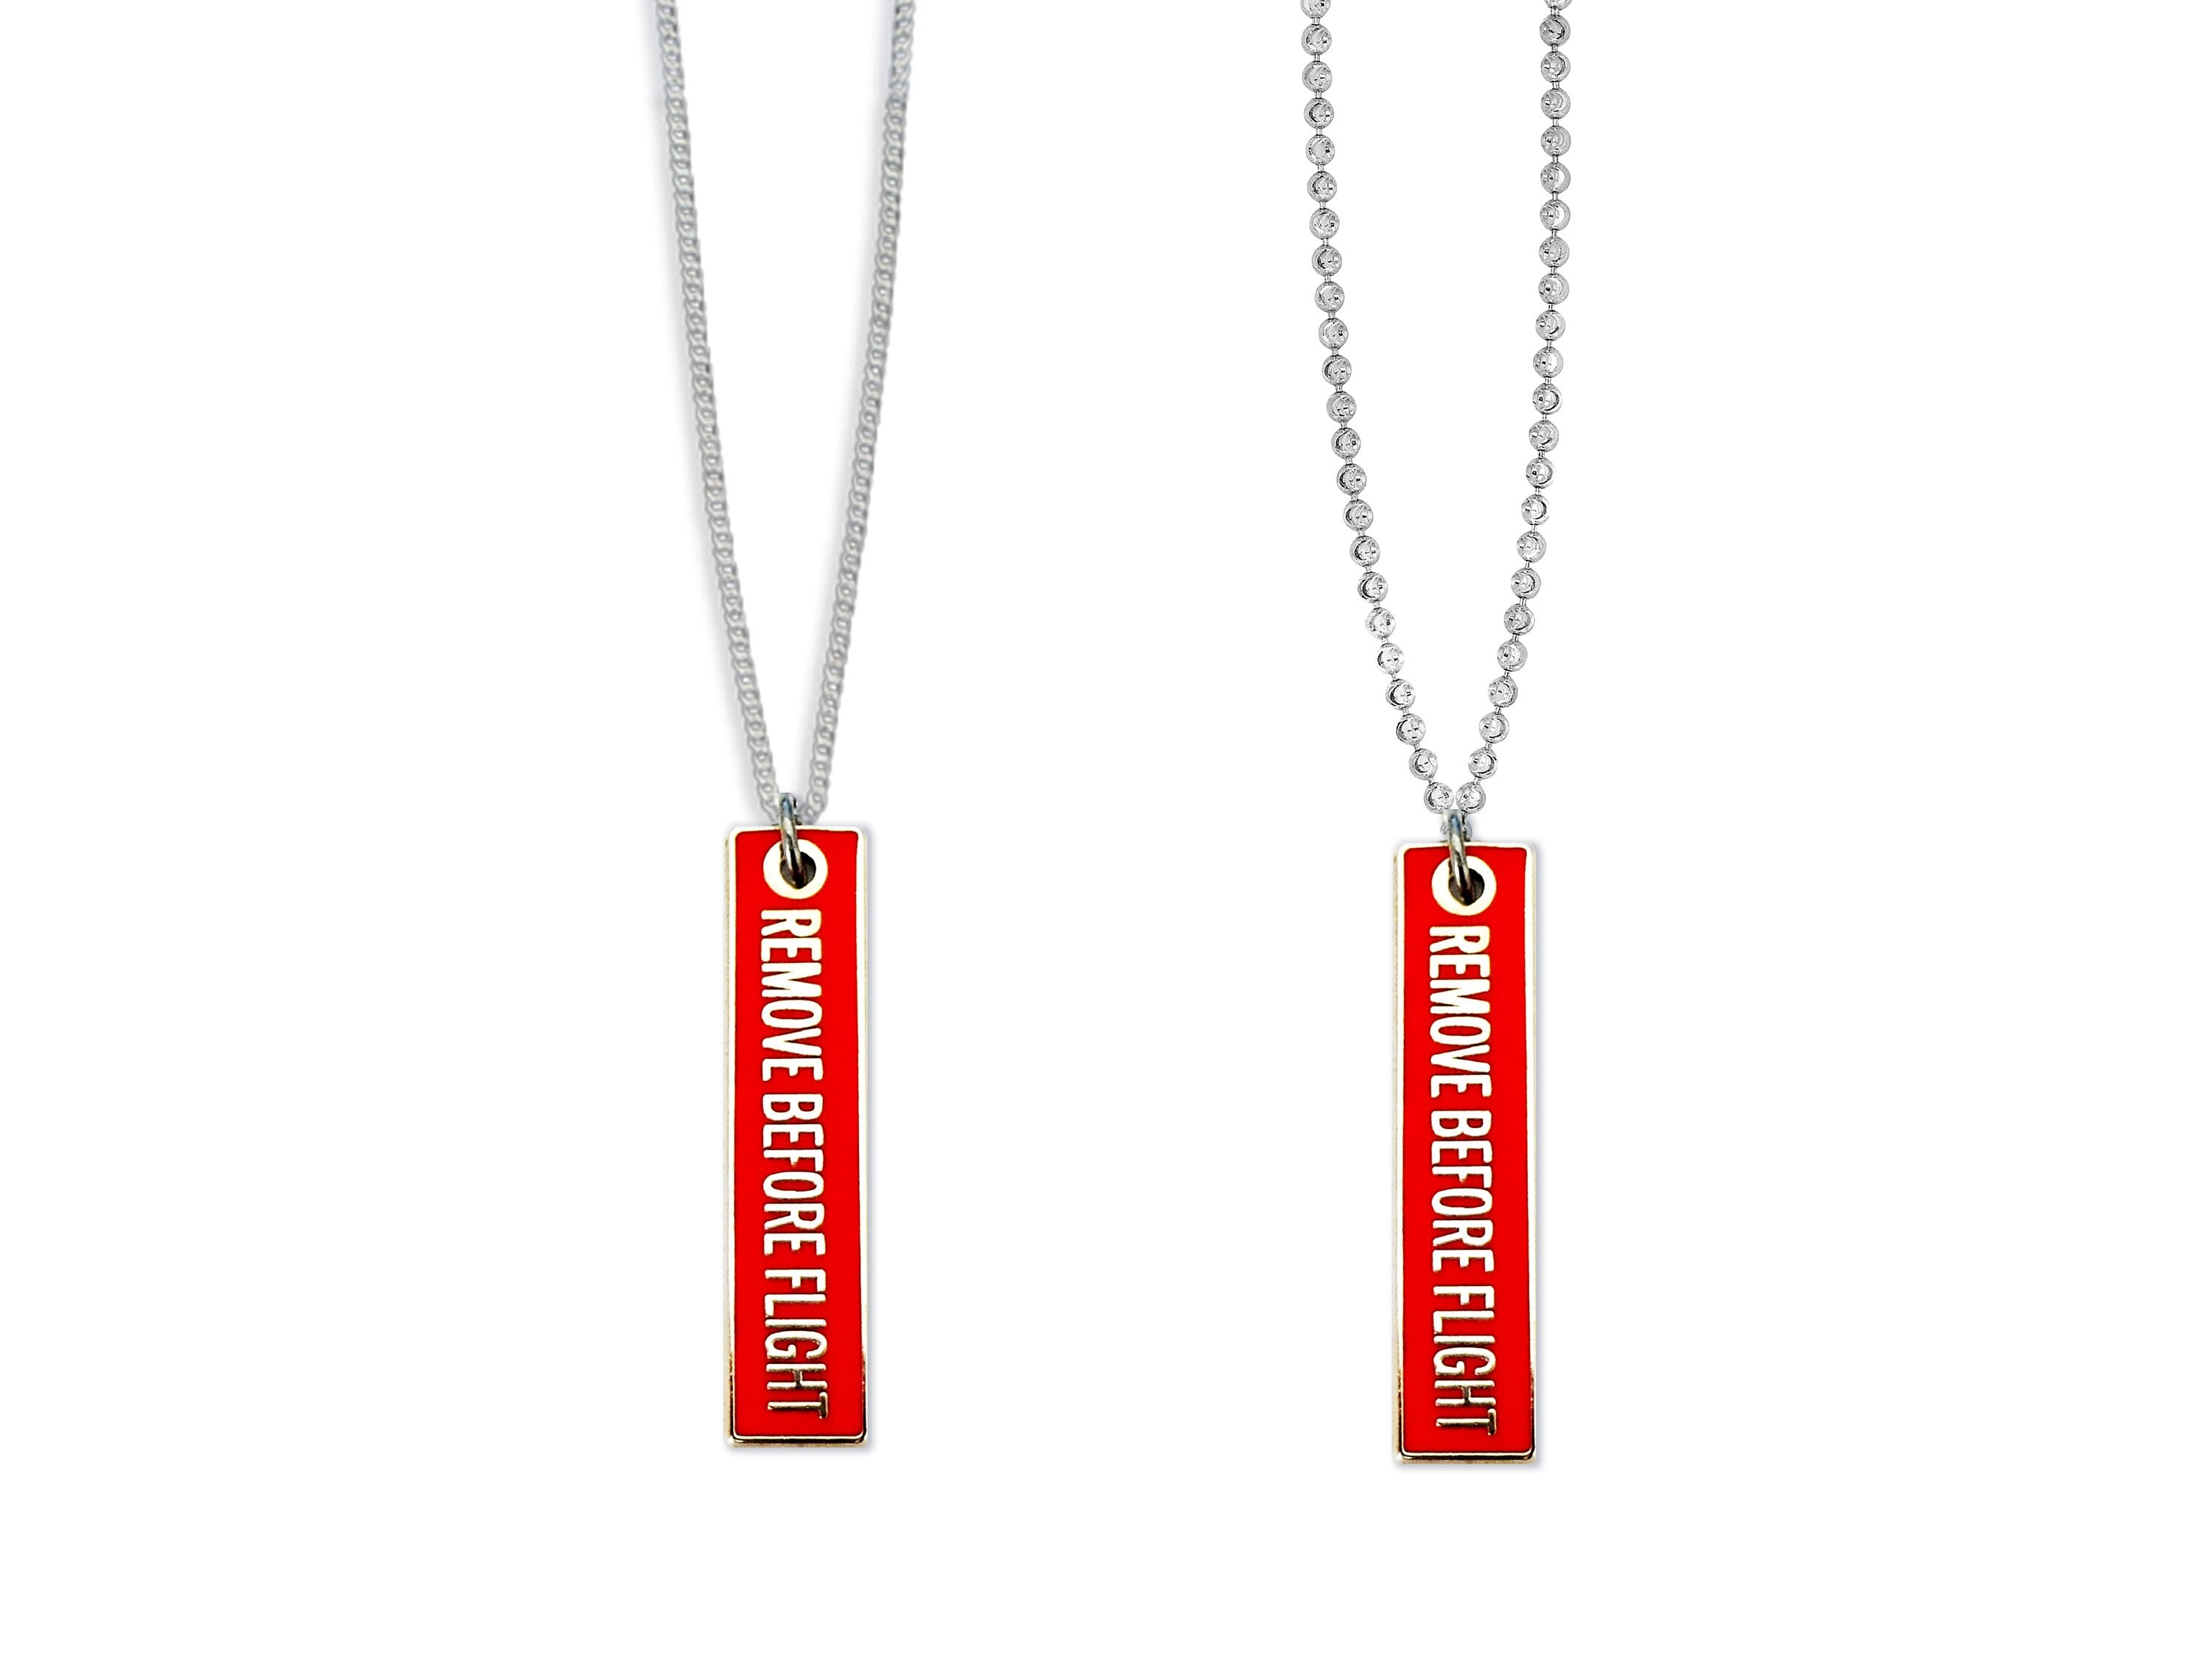 Remove Before Flight Necklace - Astronomy / Aerospace Pendant Gift - Space Jewelry For Him / Her